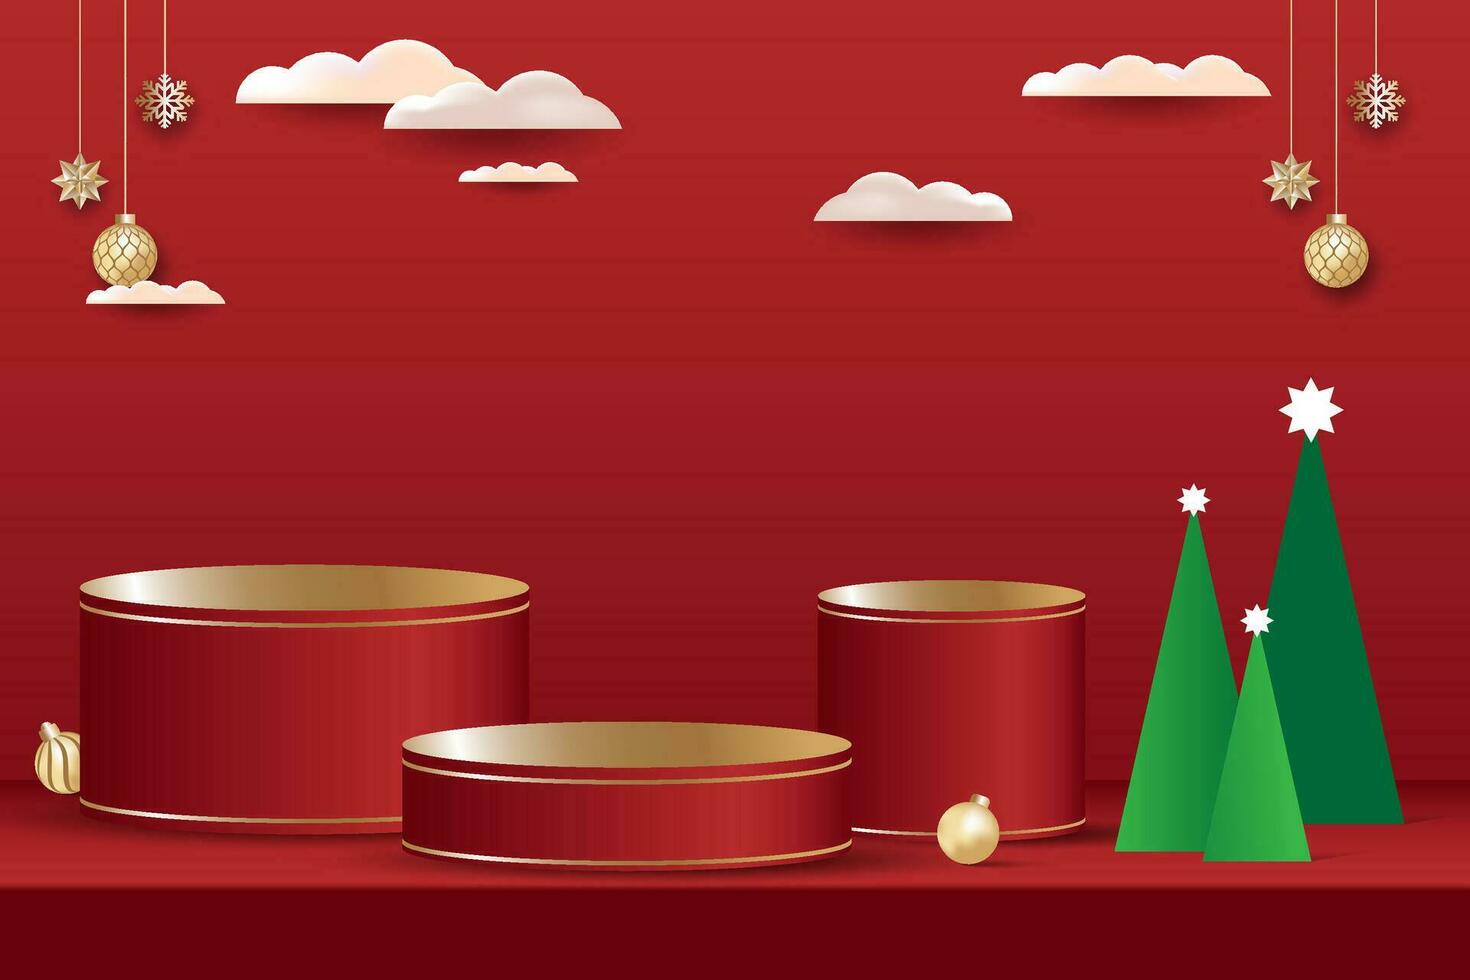 Podium or sales stand with a Christmas celebration theme on a red background vector